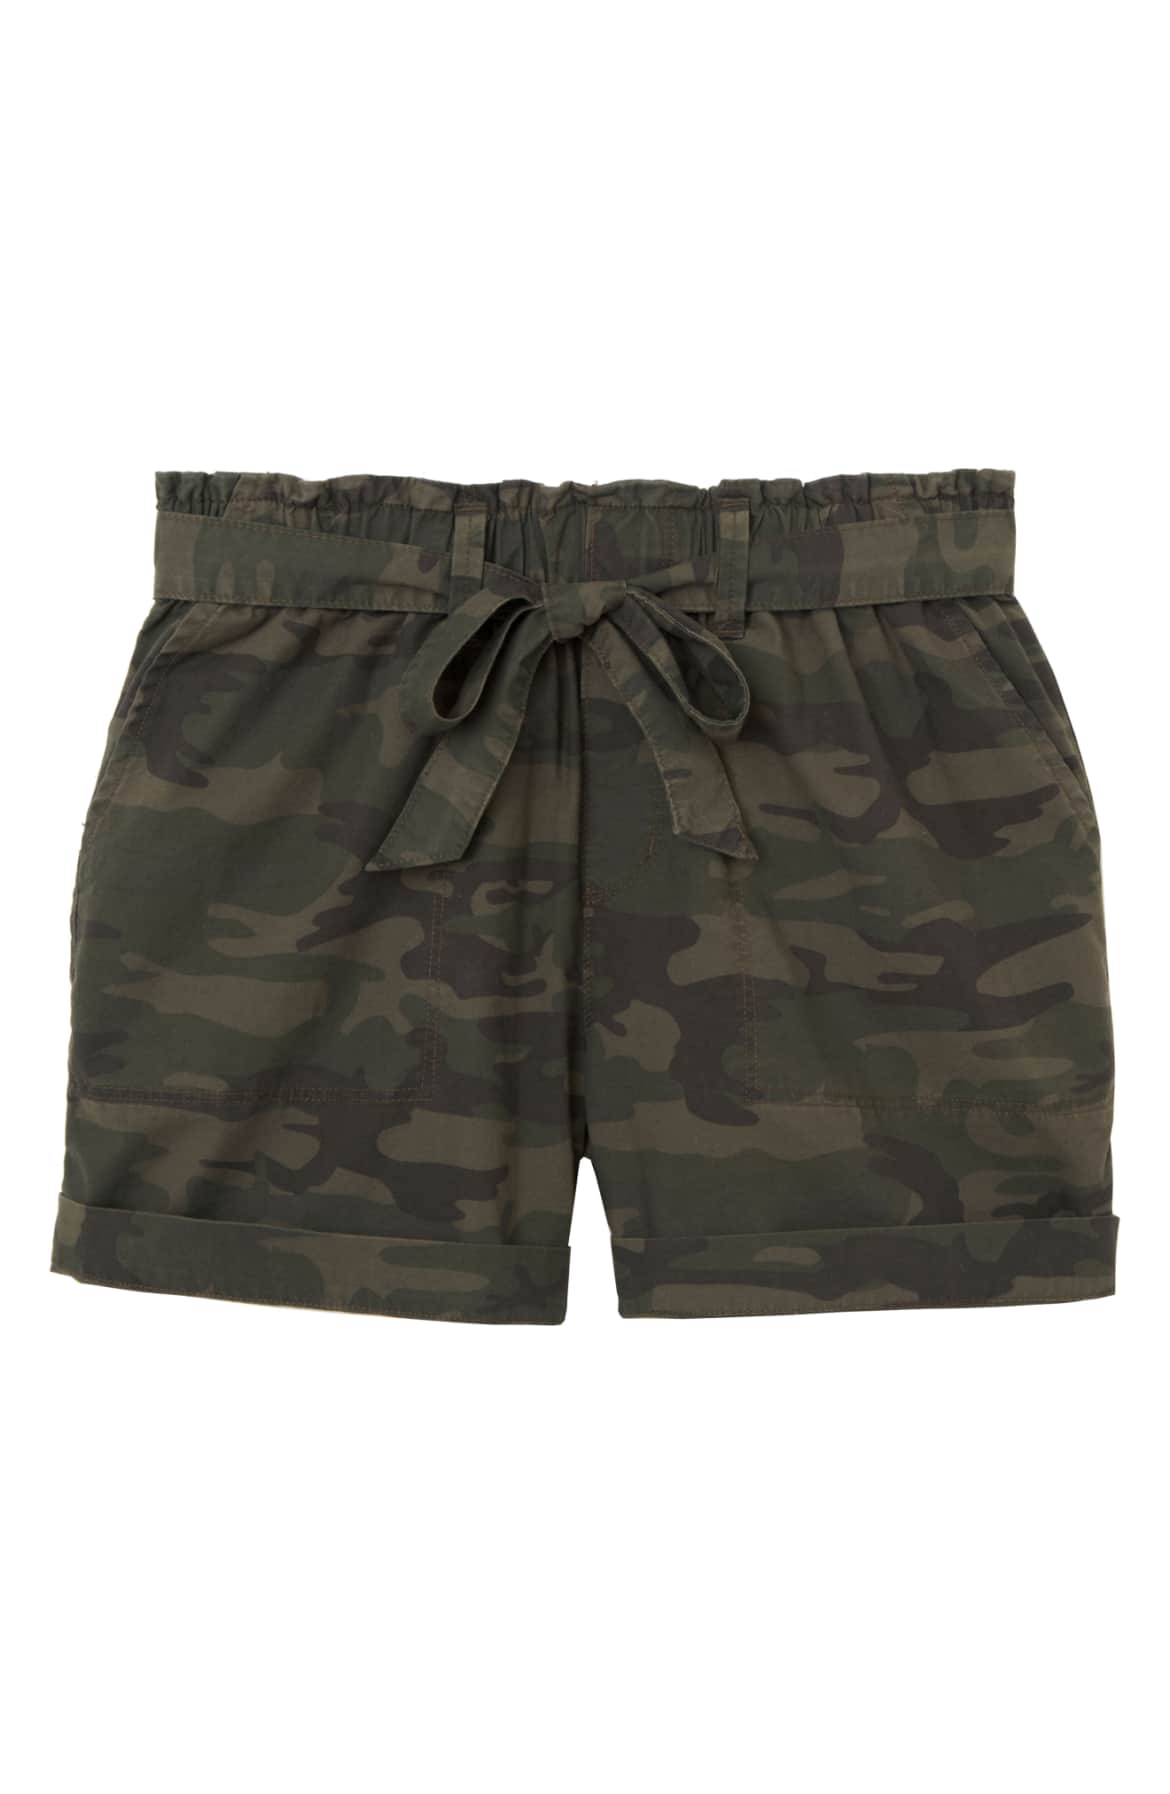 Sanctuary Women's Daydreamer Belted Camo Shorts Army Green XS